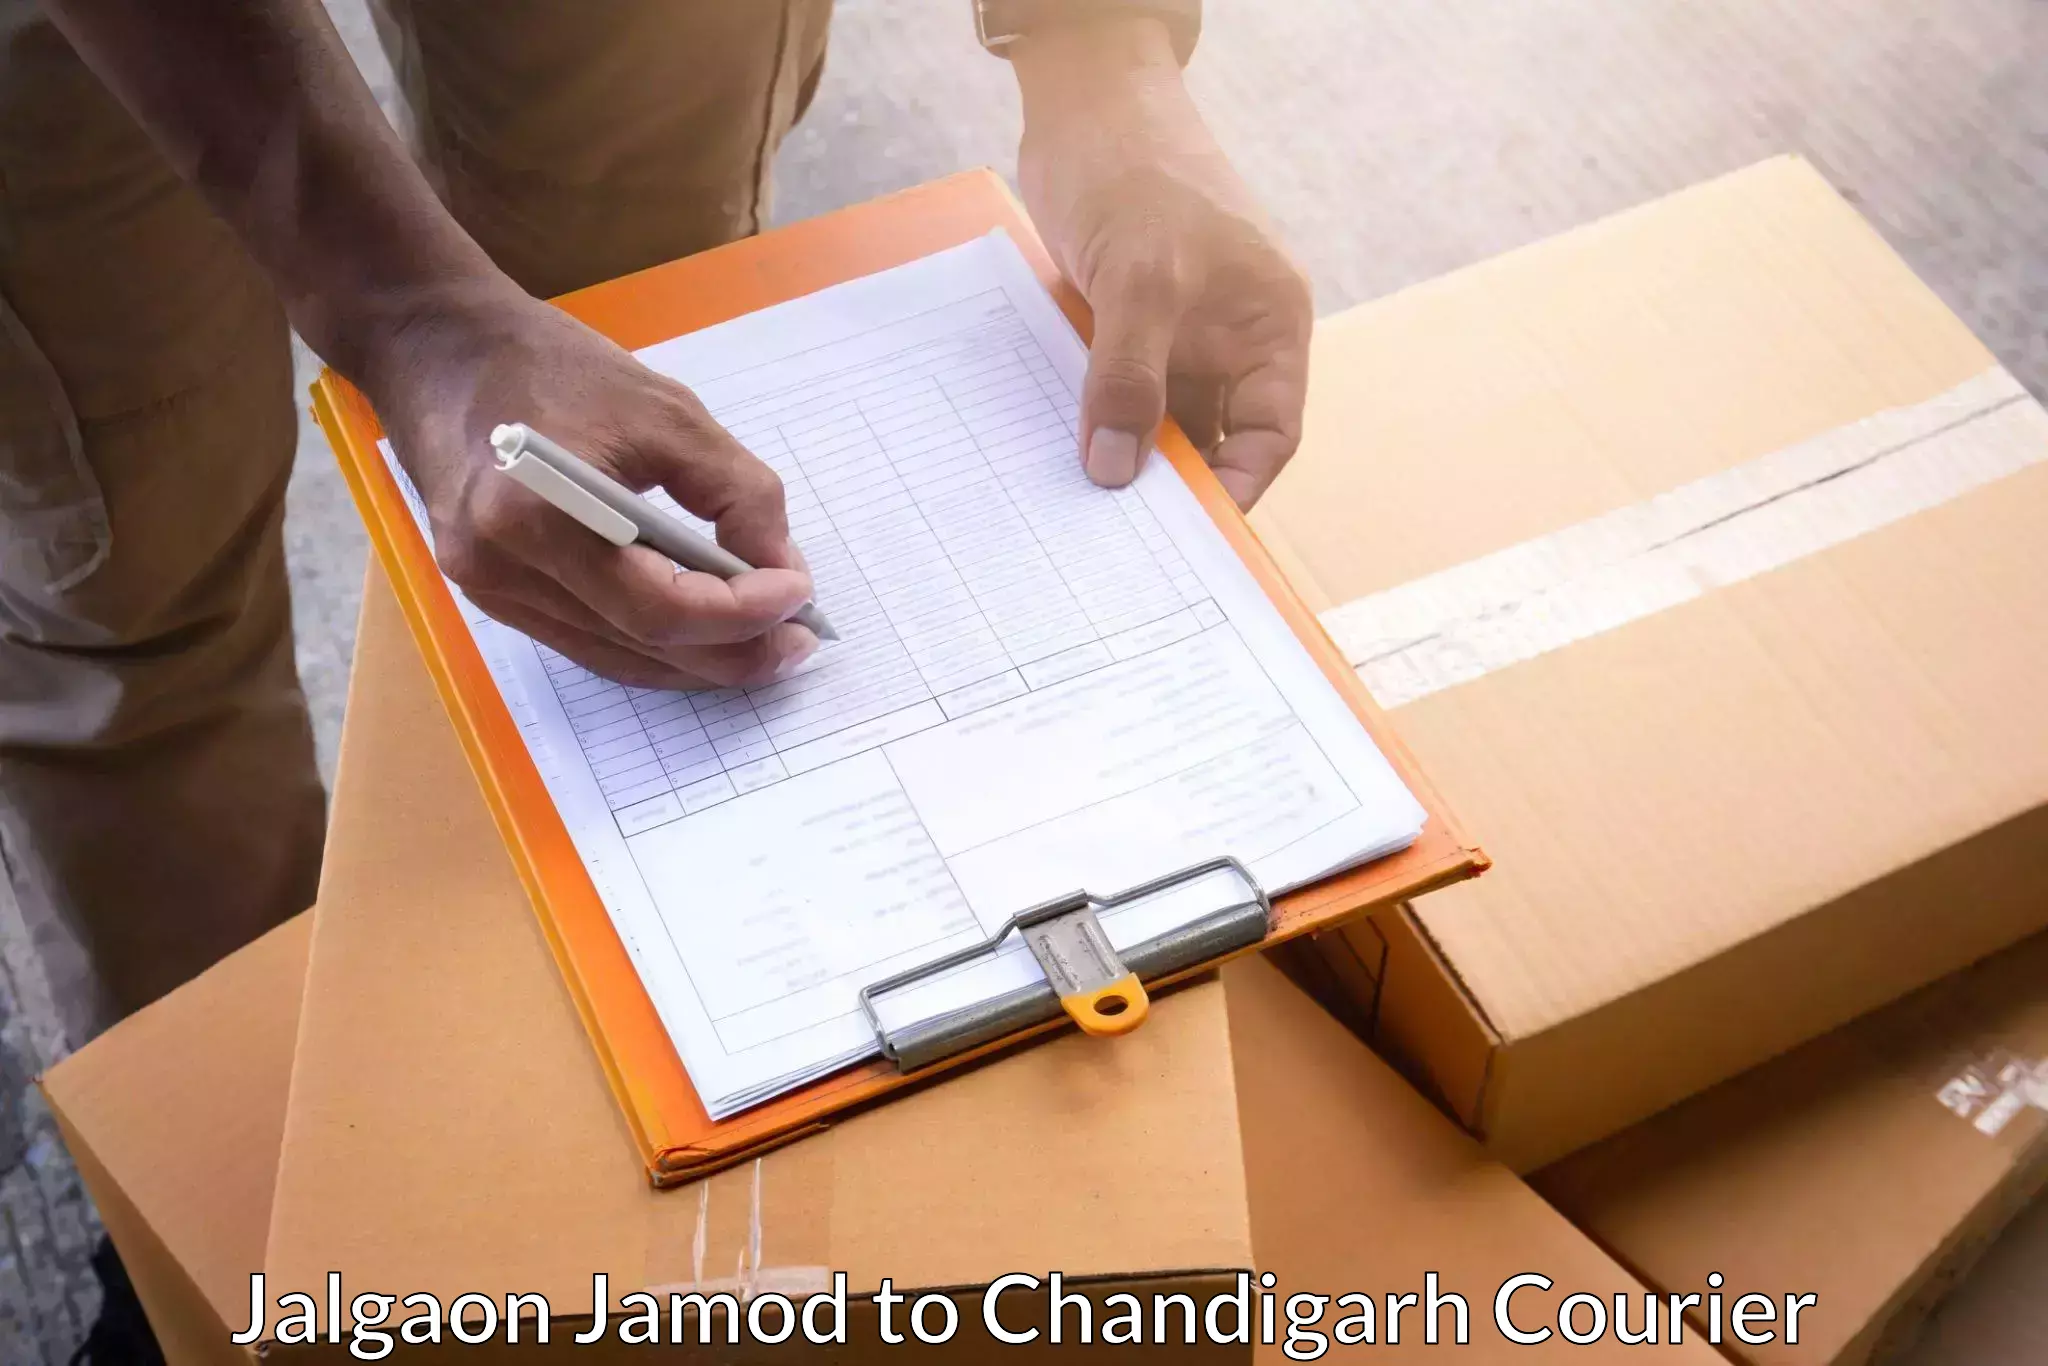 Express courier facilities Jalgaon Jamod to Chandigarh